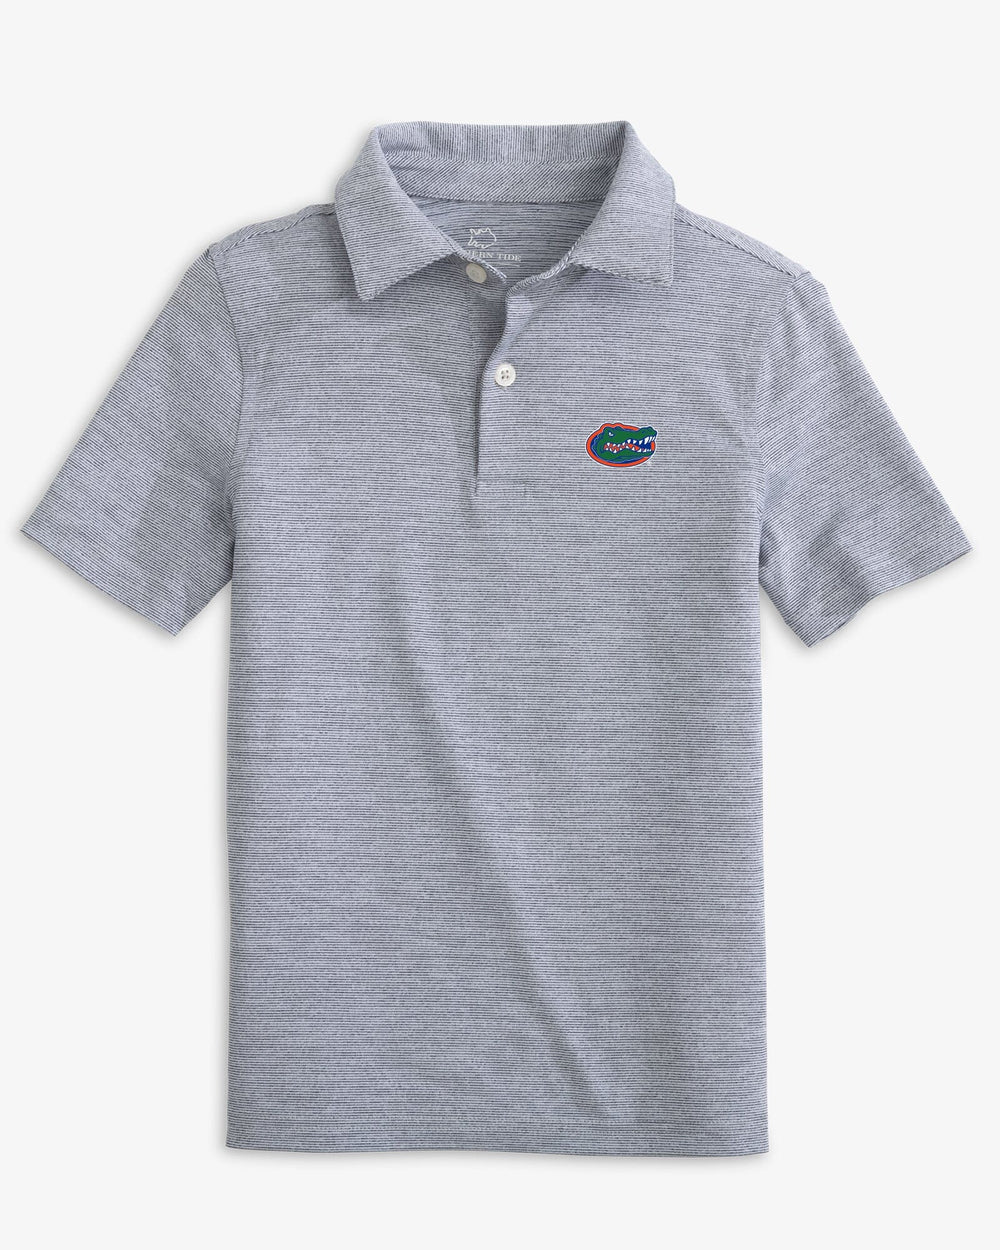 The front view of the Florida Gators Boys Driver Spacedye Performance Polo Shirt by Southern Tide - Navy